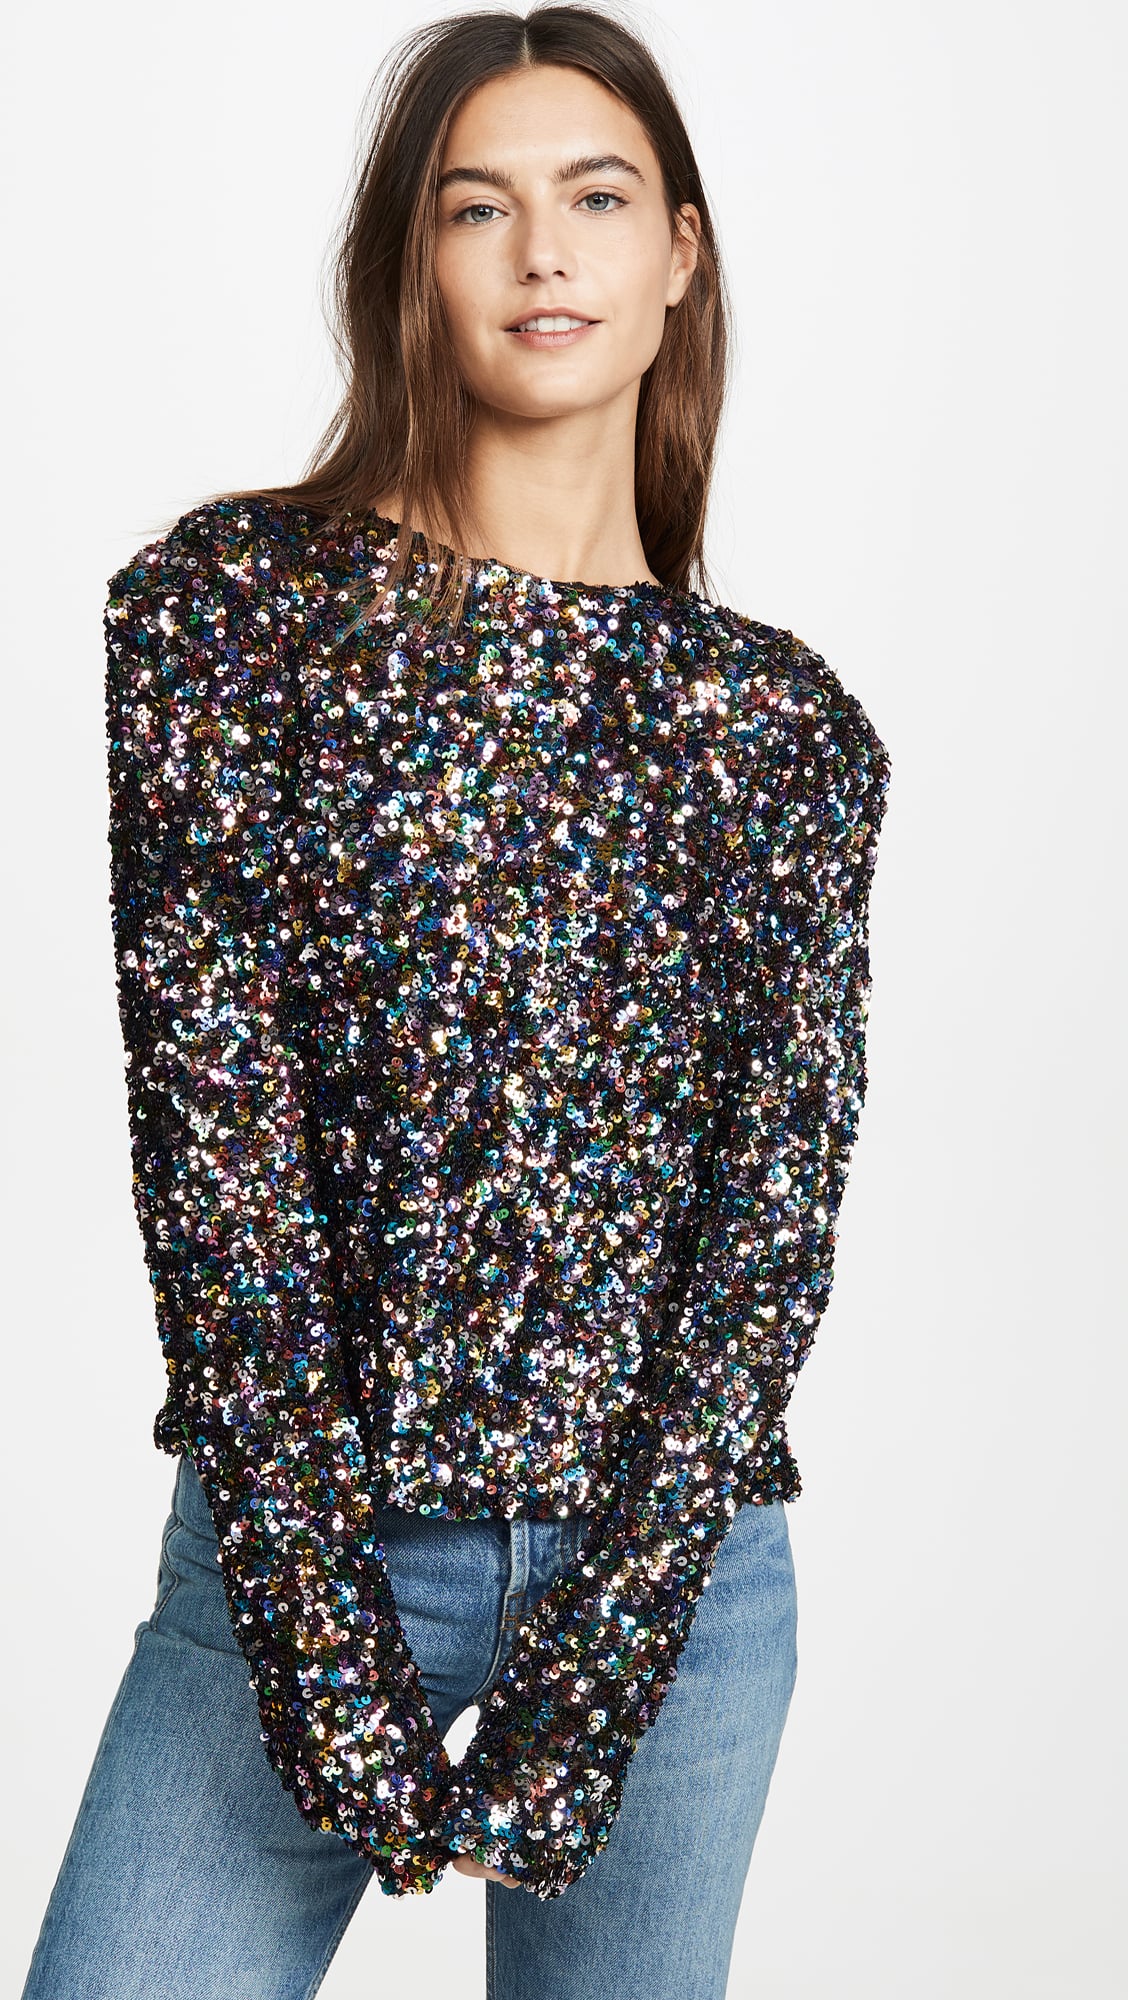 best sparkly tops